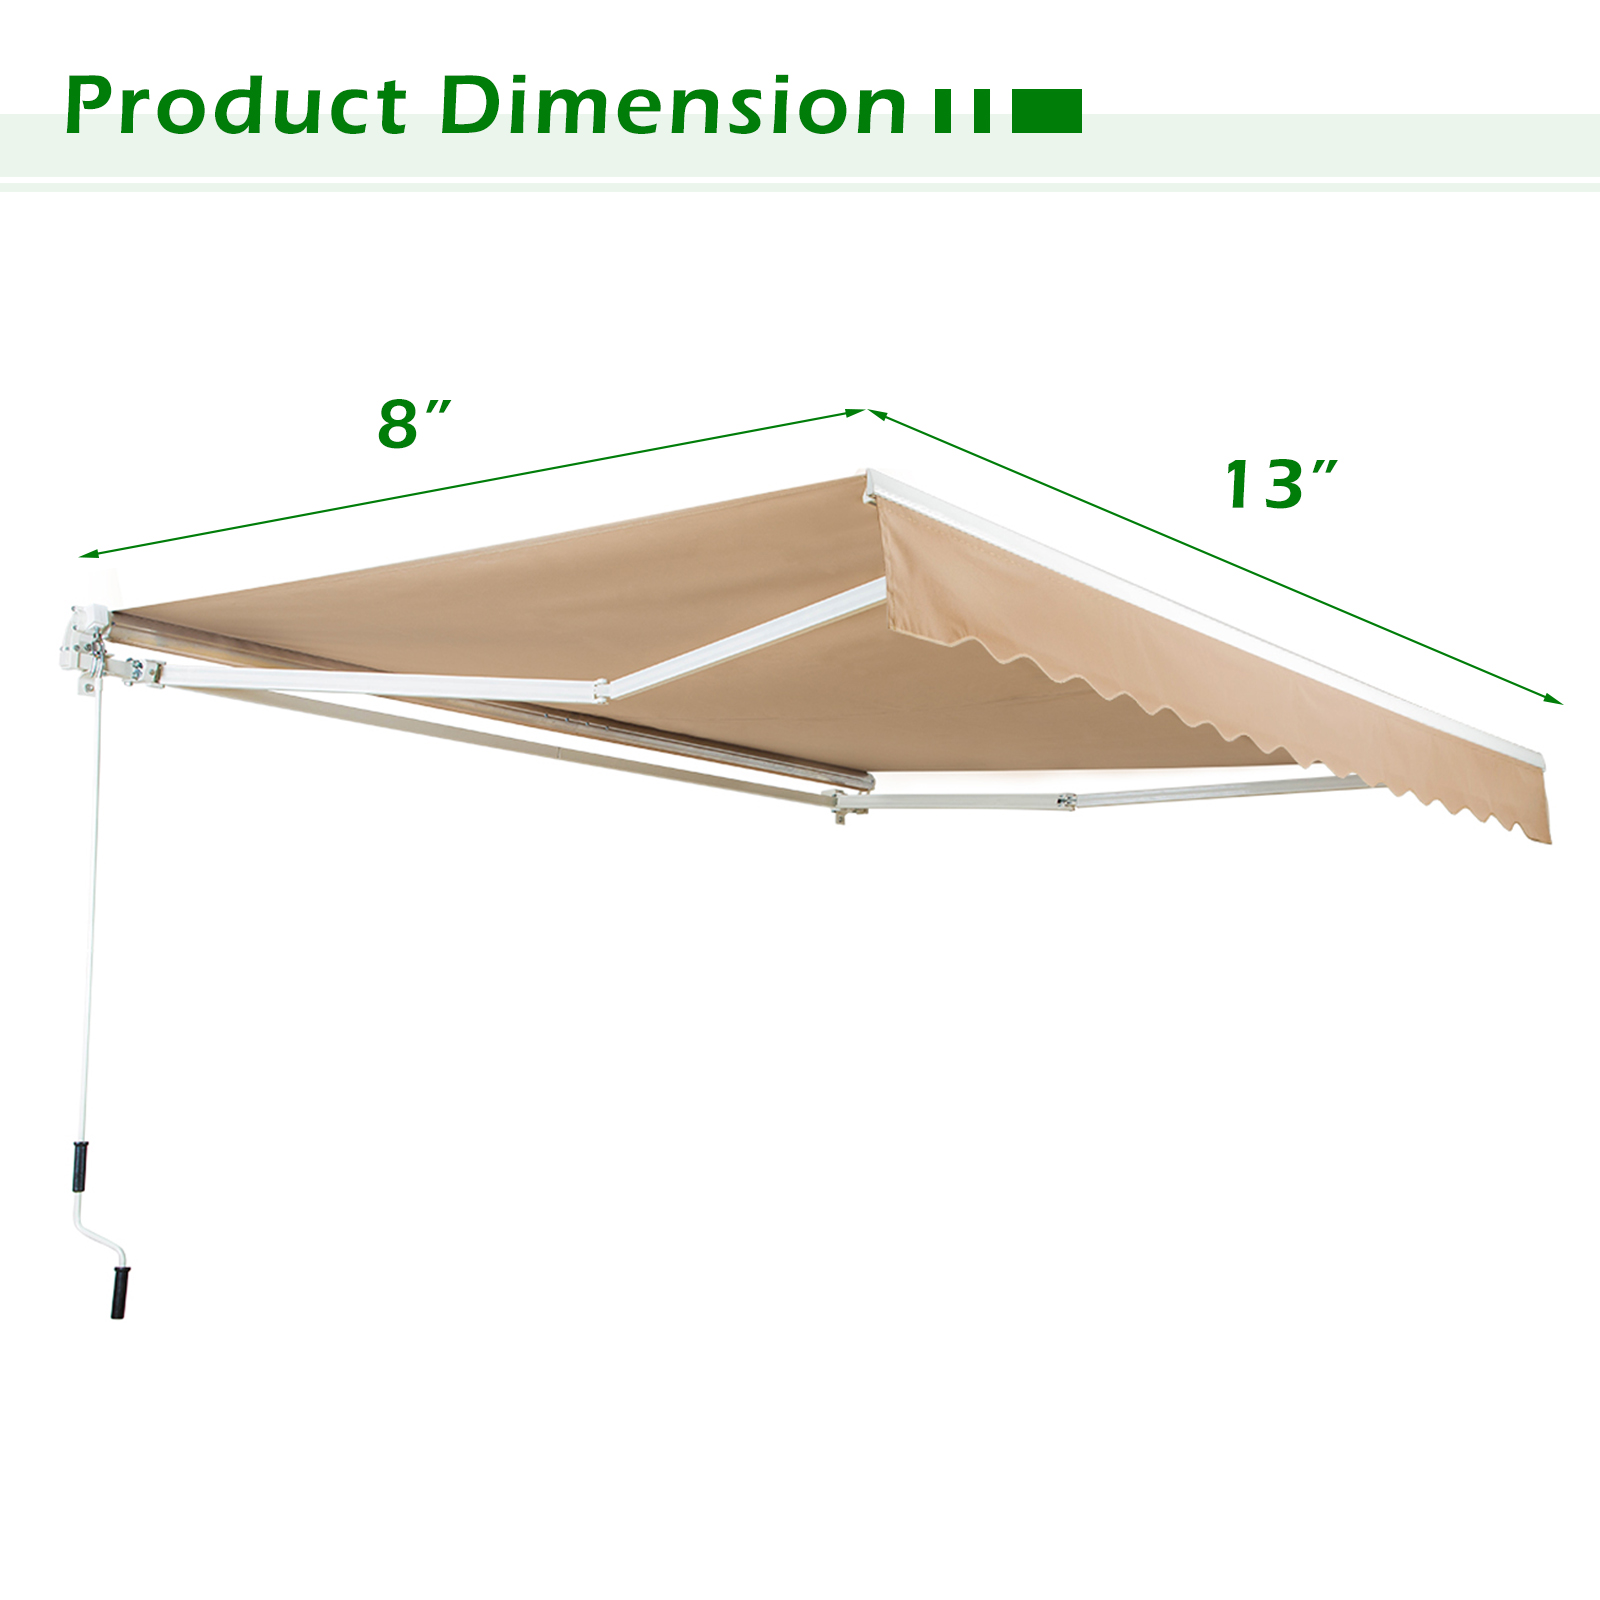 AECOJOY 13' x 8' Manual Retractable Patio Awning,Outdoor Awning Retractable Sunshade Shelter-Beige - image 2 of 6